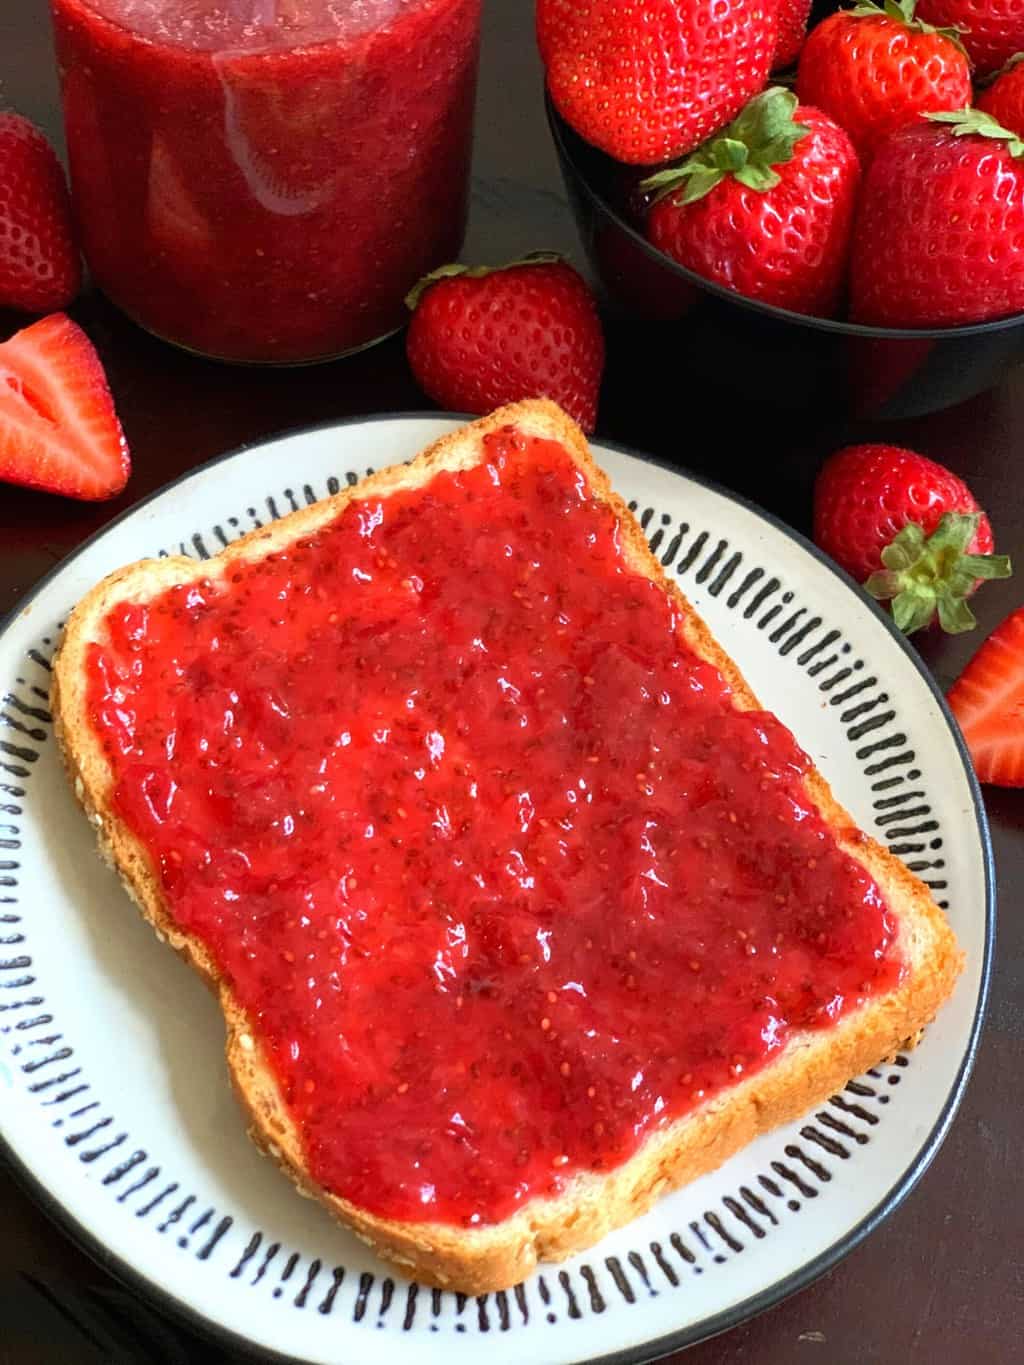 strawberry jam spread on the bread with strawberries on the side